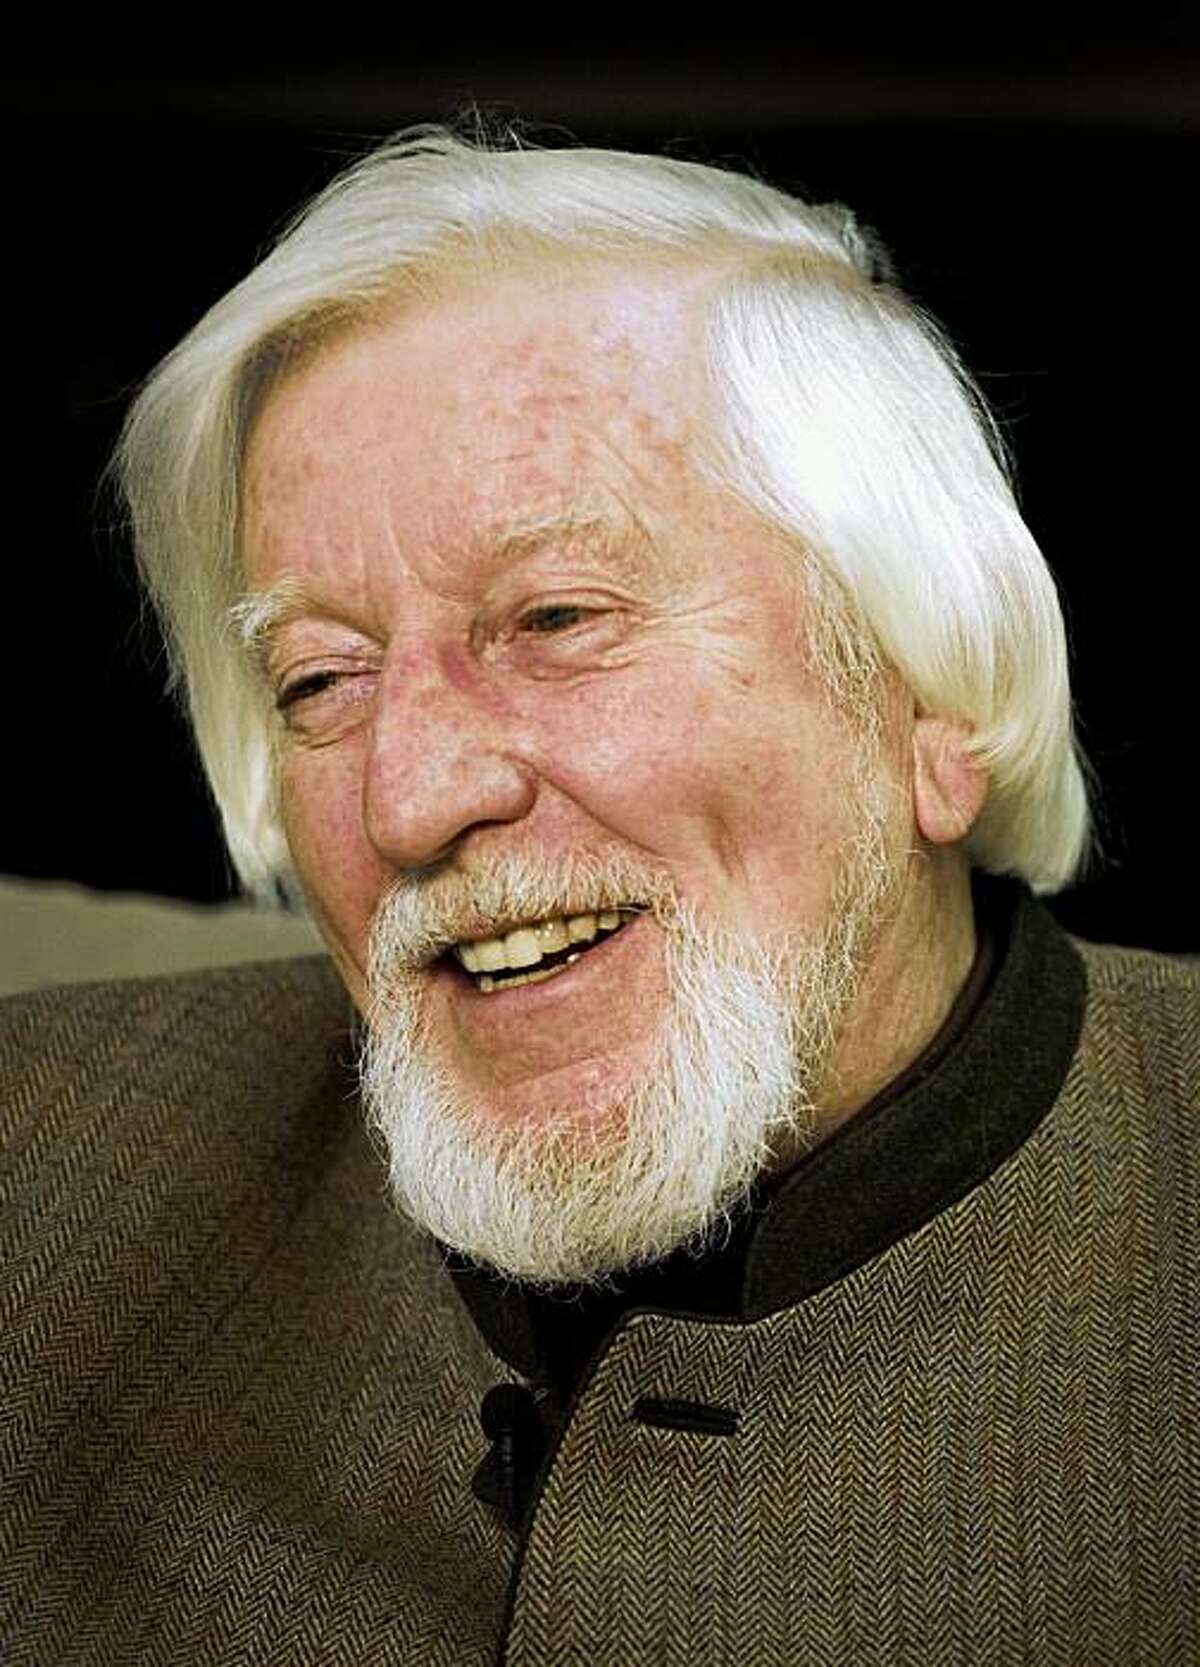 FILE - In this April 10, 2008 file photo, Caroll Spinney, puppeteer for the character Big Bird, is interviewed during a break from taping an episode of "Sesame Street" in New York. (AP Photo/Mark Lennihan, file)